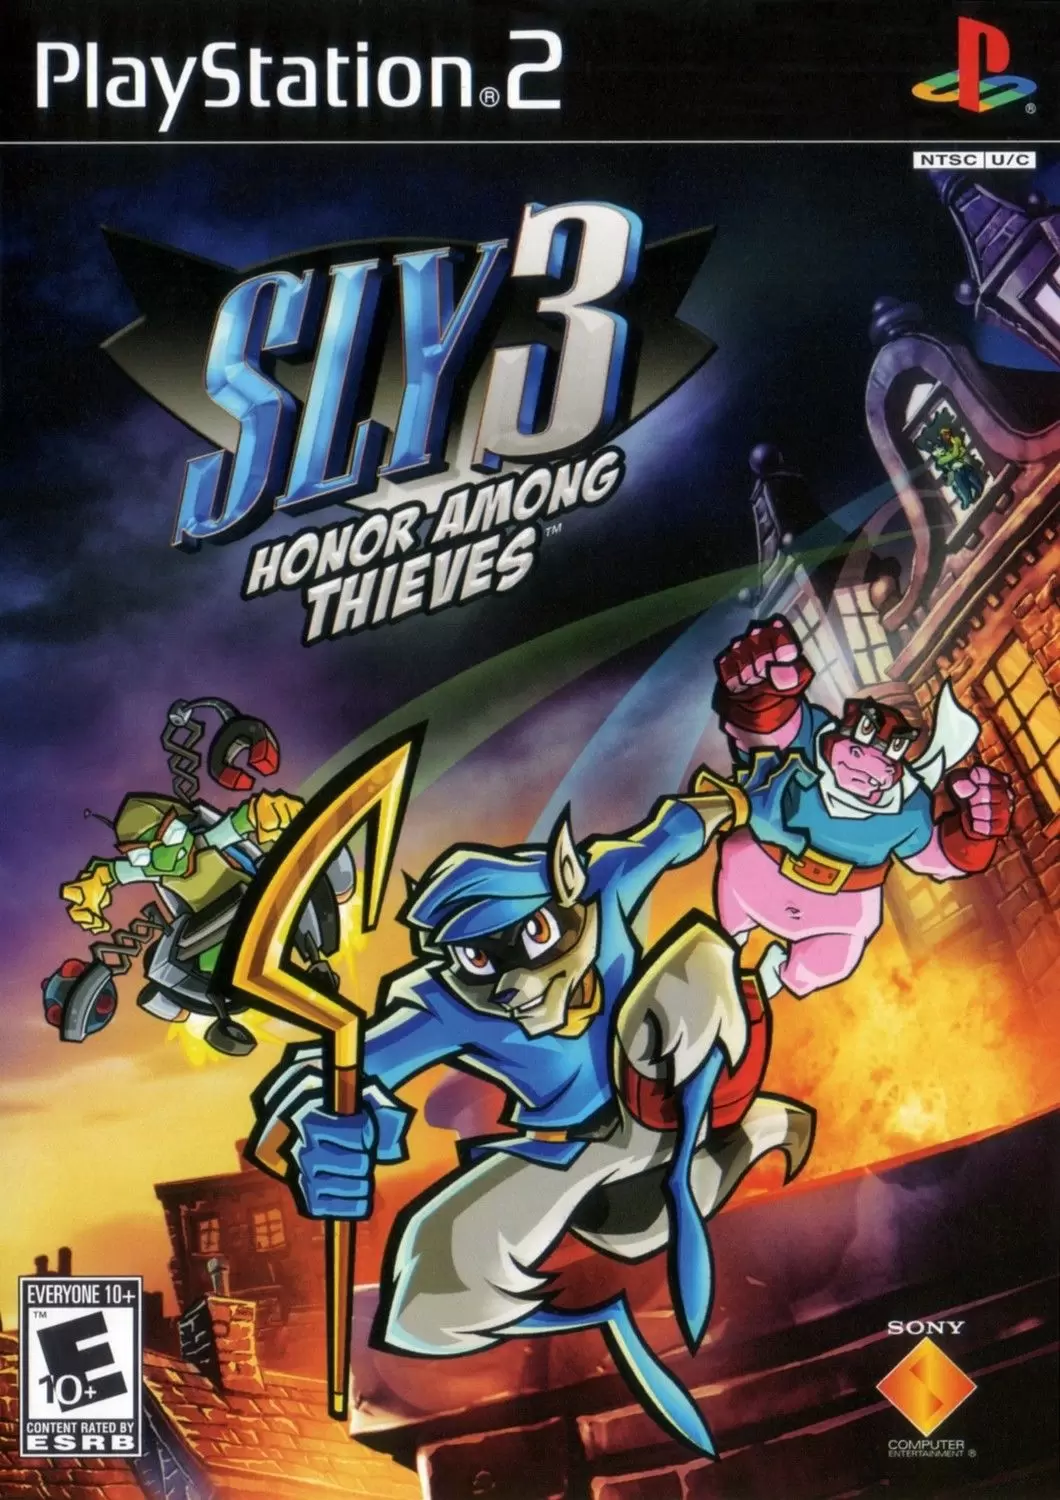 PS2 Games - Sly 3: Honor Among Thieves